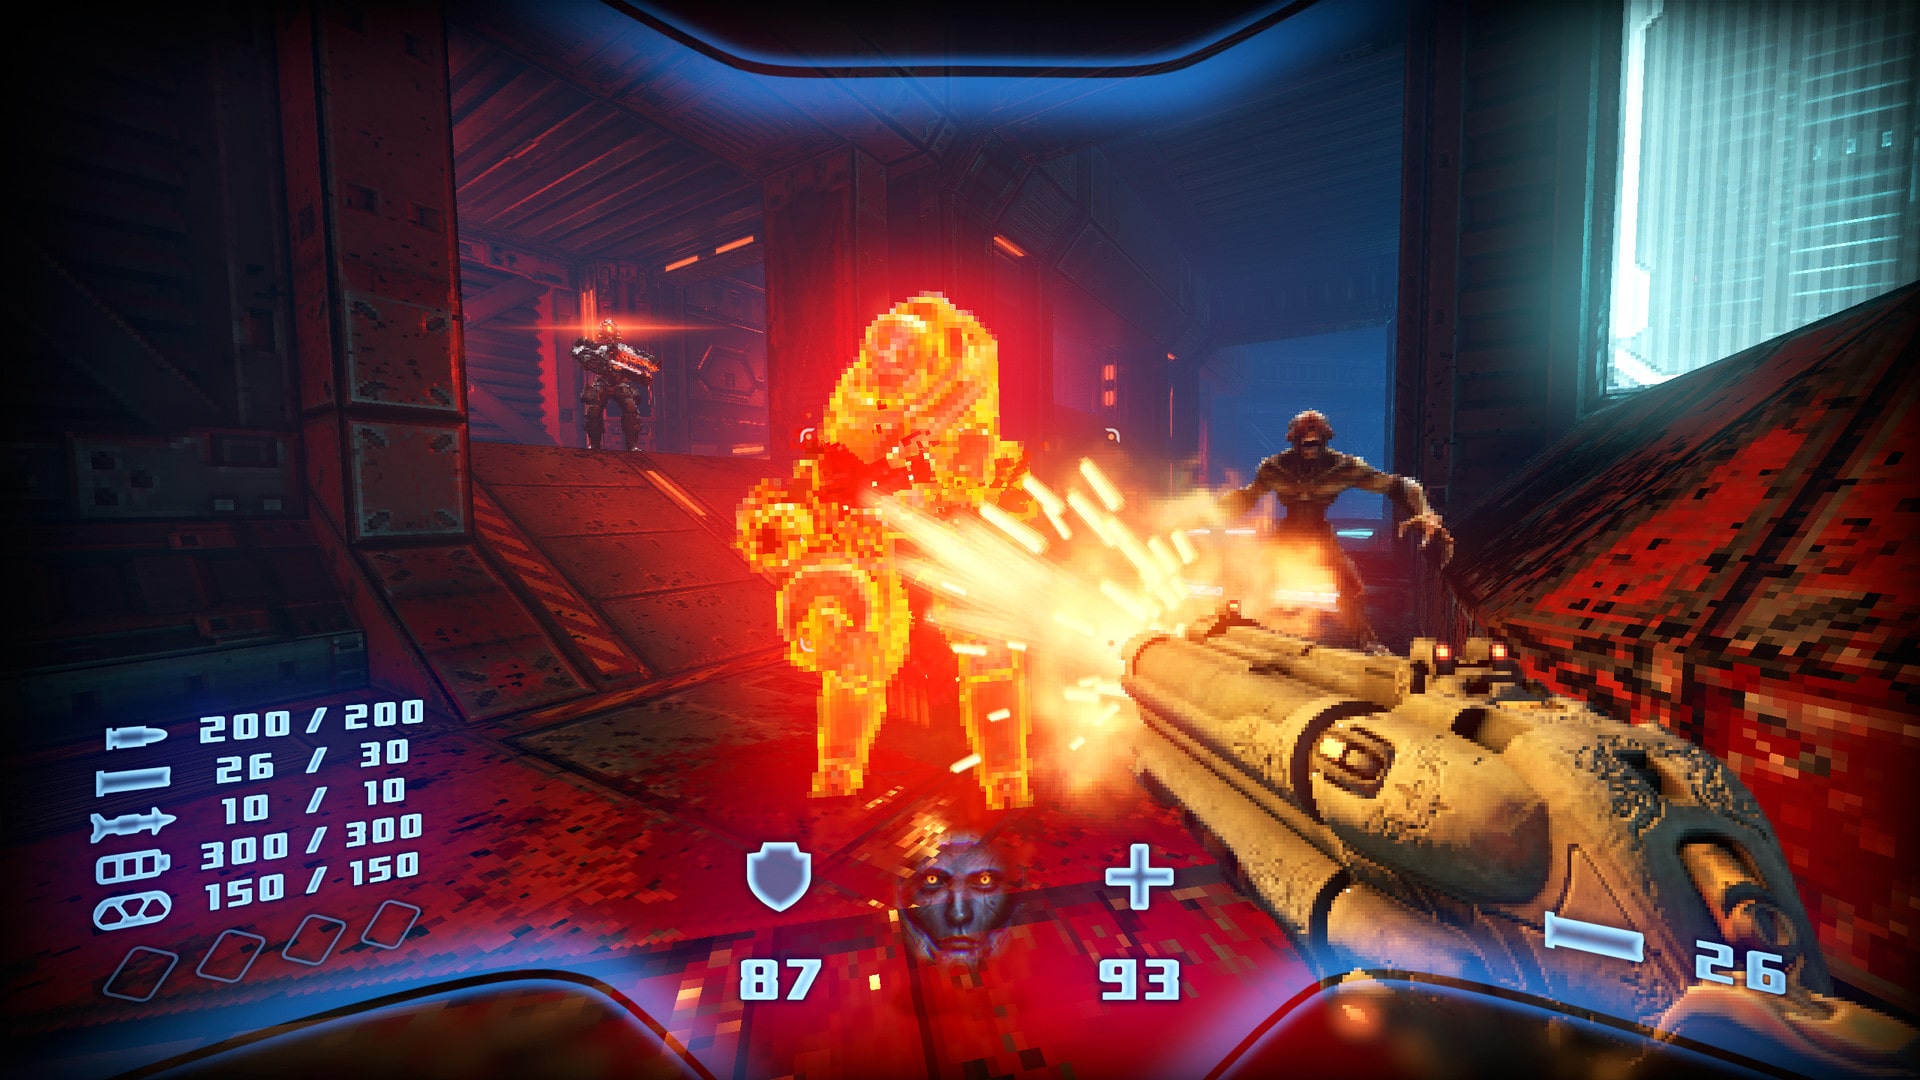 Gameplay screenshot of Prodeus, highlighting its retro-style first-person shooter action